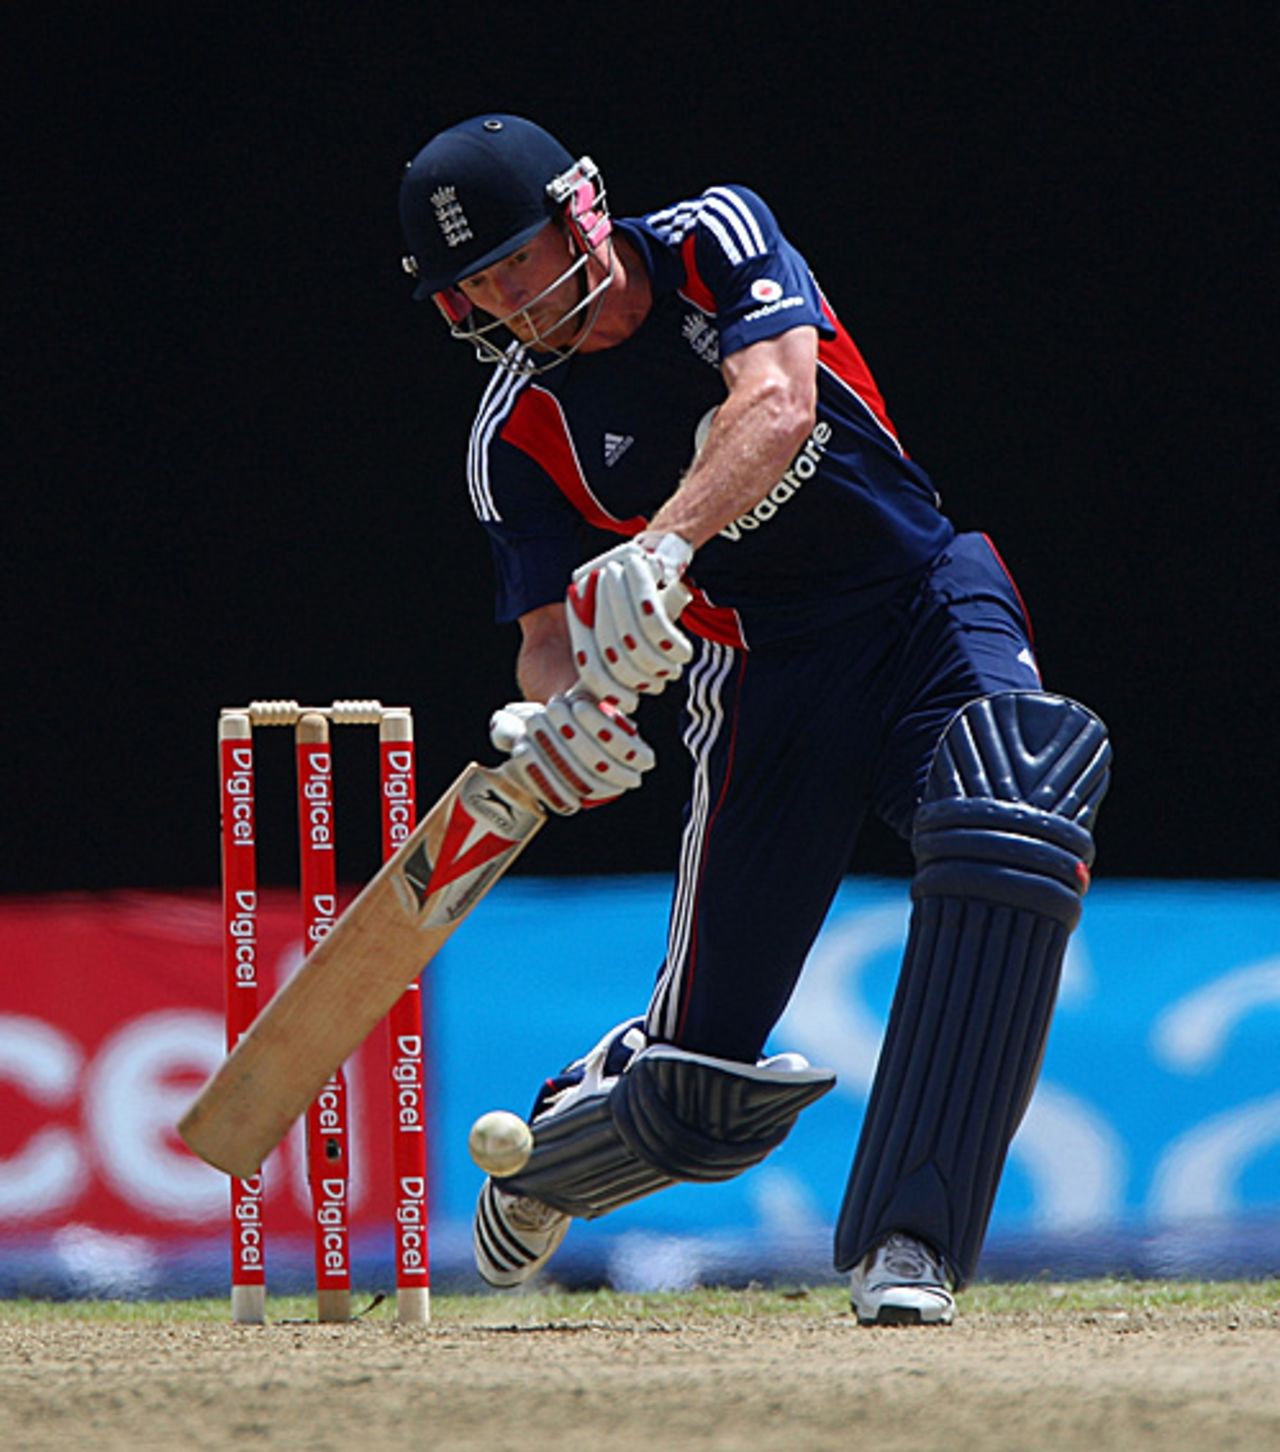 Paul Collingwood attempts to smash one over midwicket, West Indies v England, 1st ODI, Providence, March 20, 2009